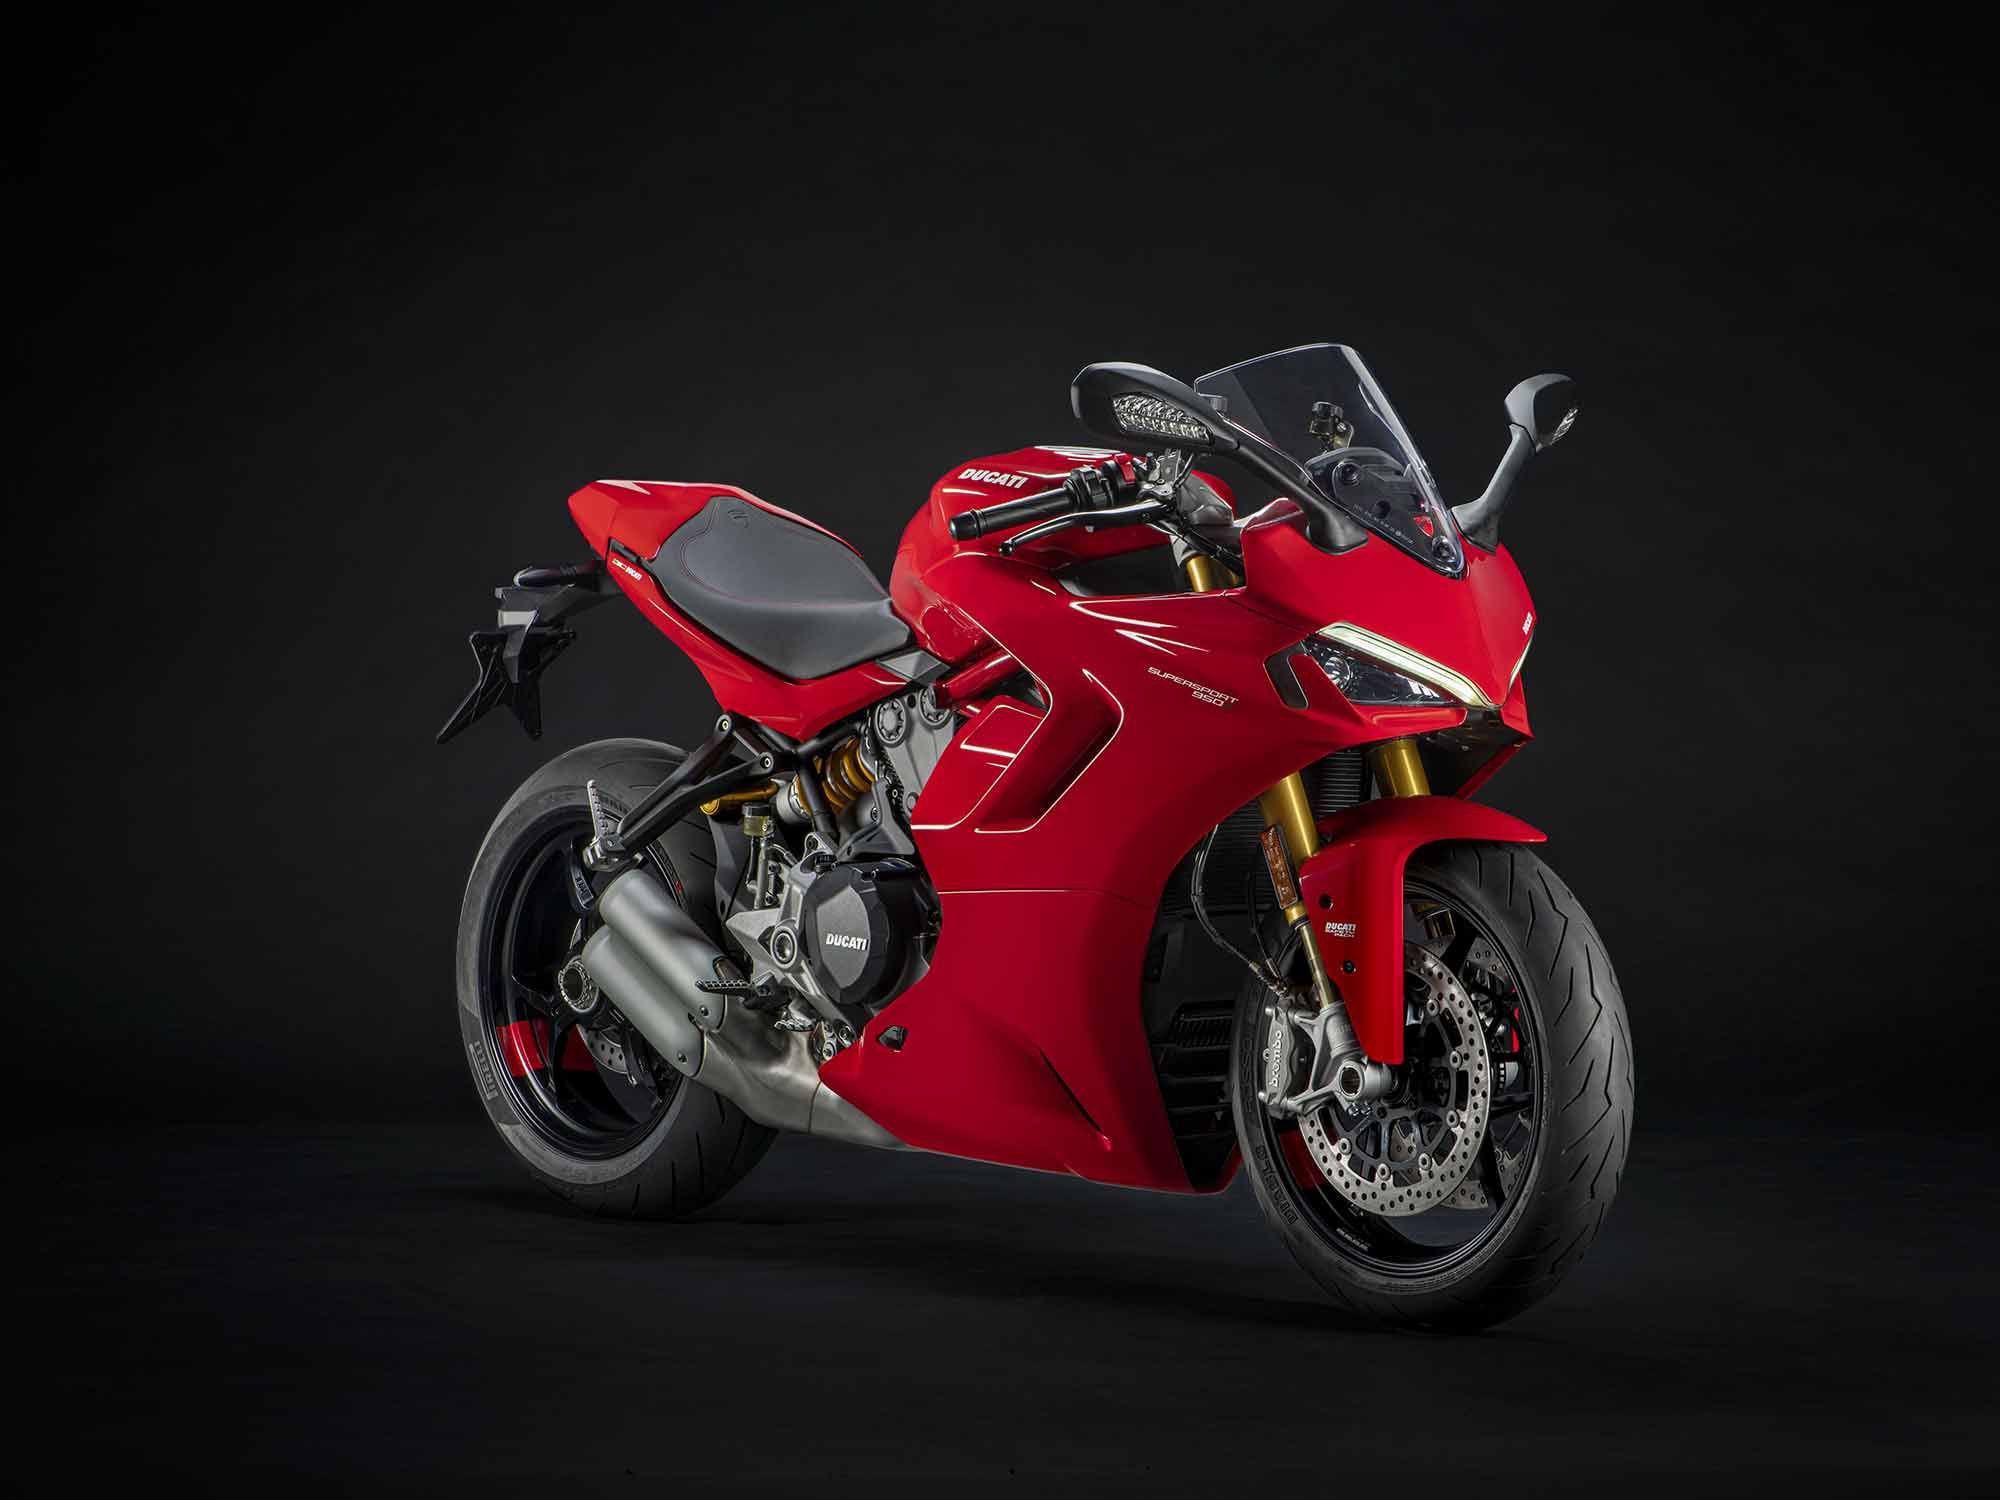 The redesigned extractors are inspired by the Panigale V4 and are designed to pull hot air away from the rider.